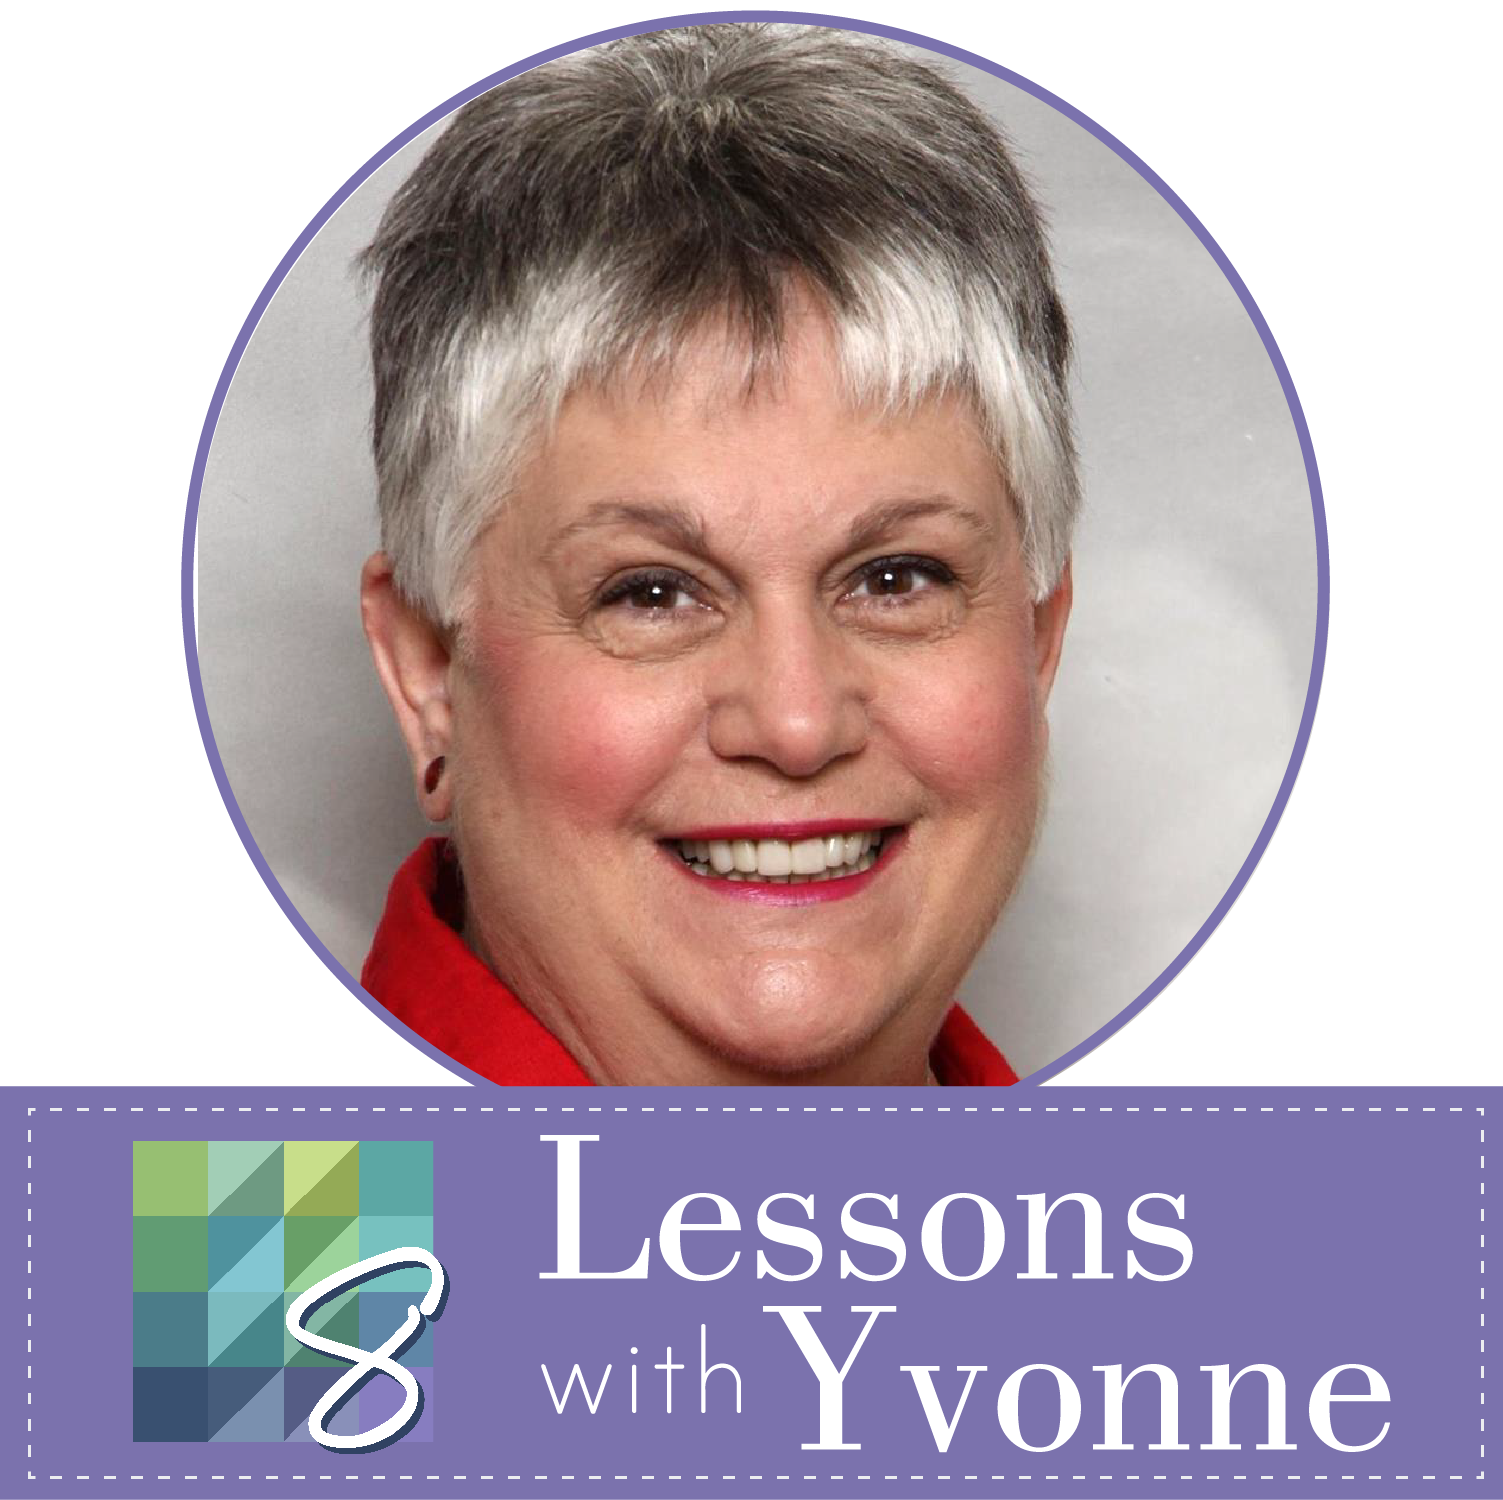 EQ8 Lessons with Yvonne